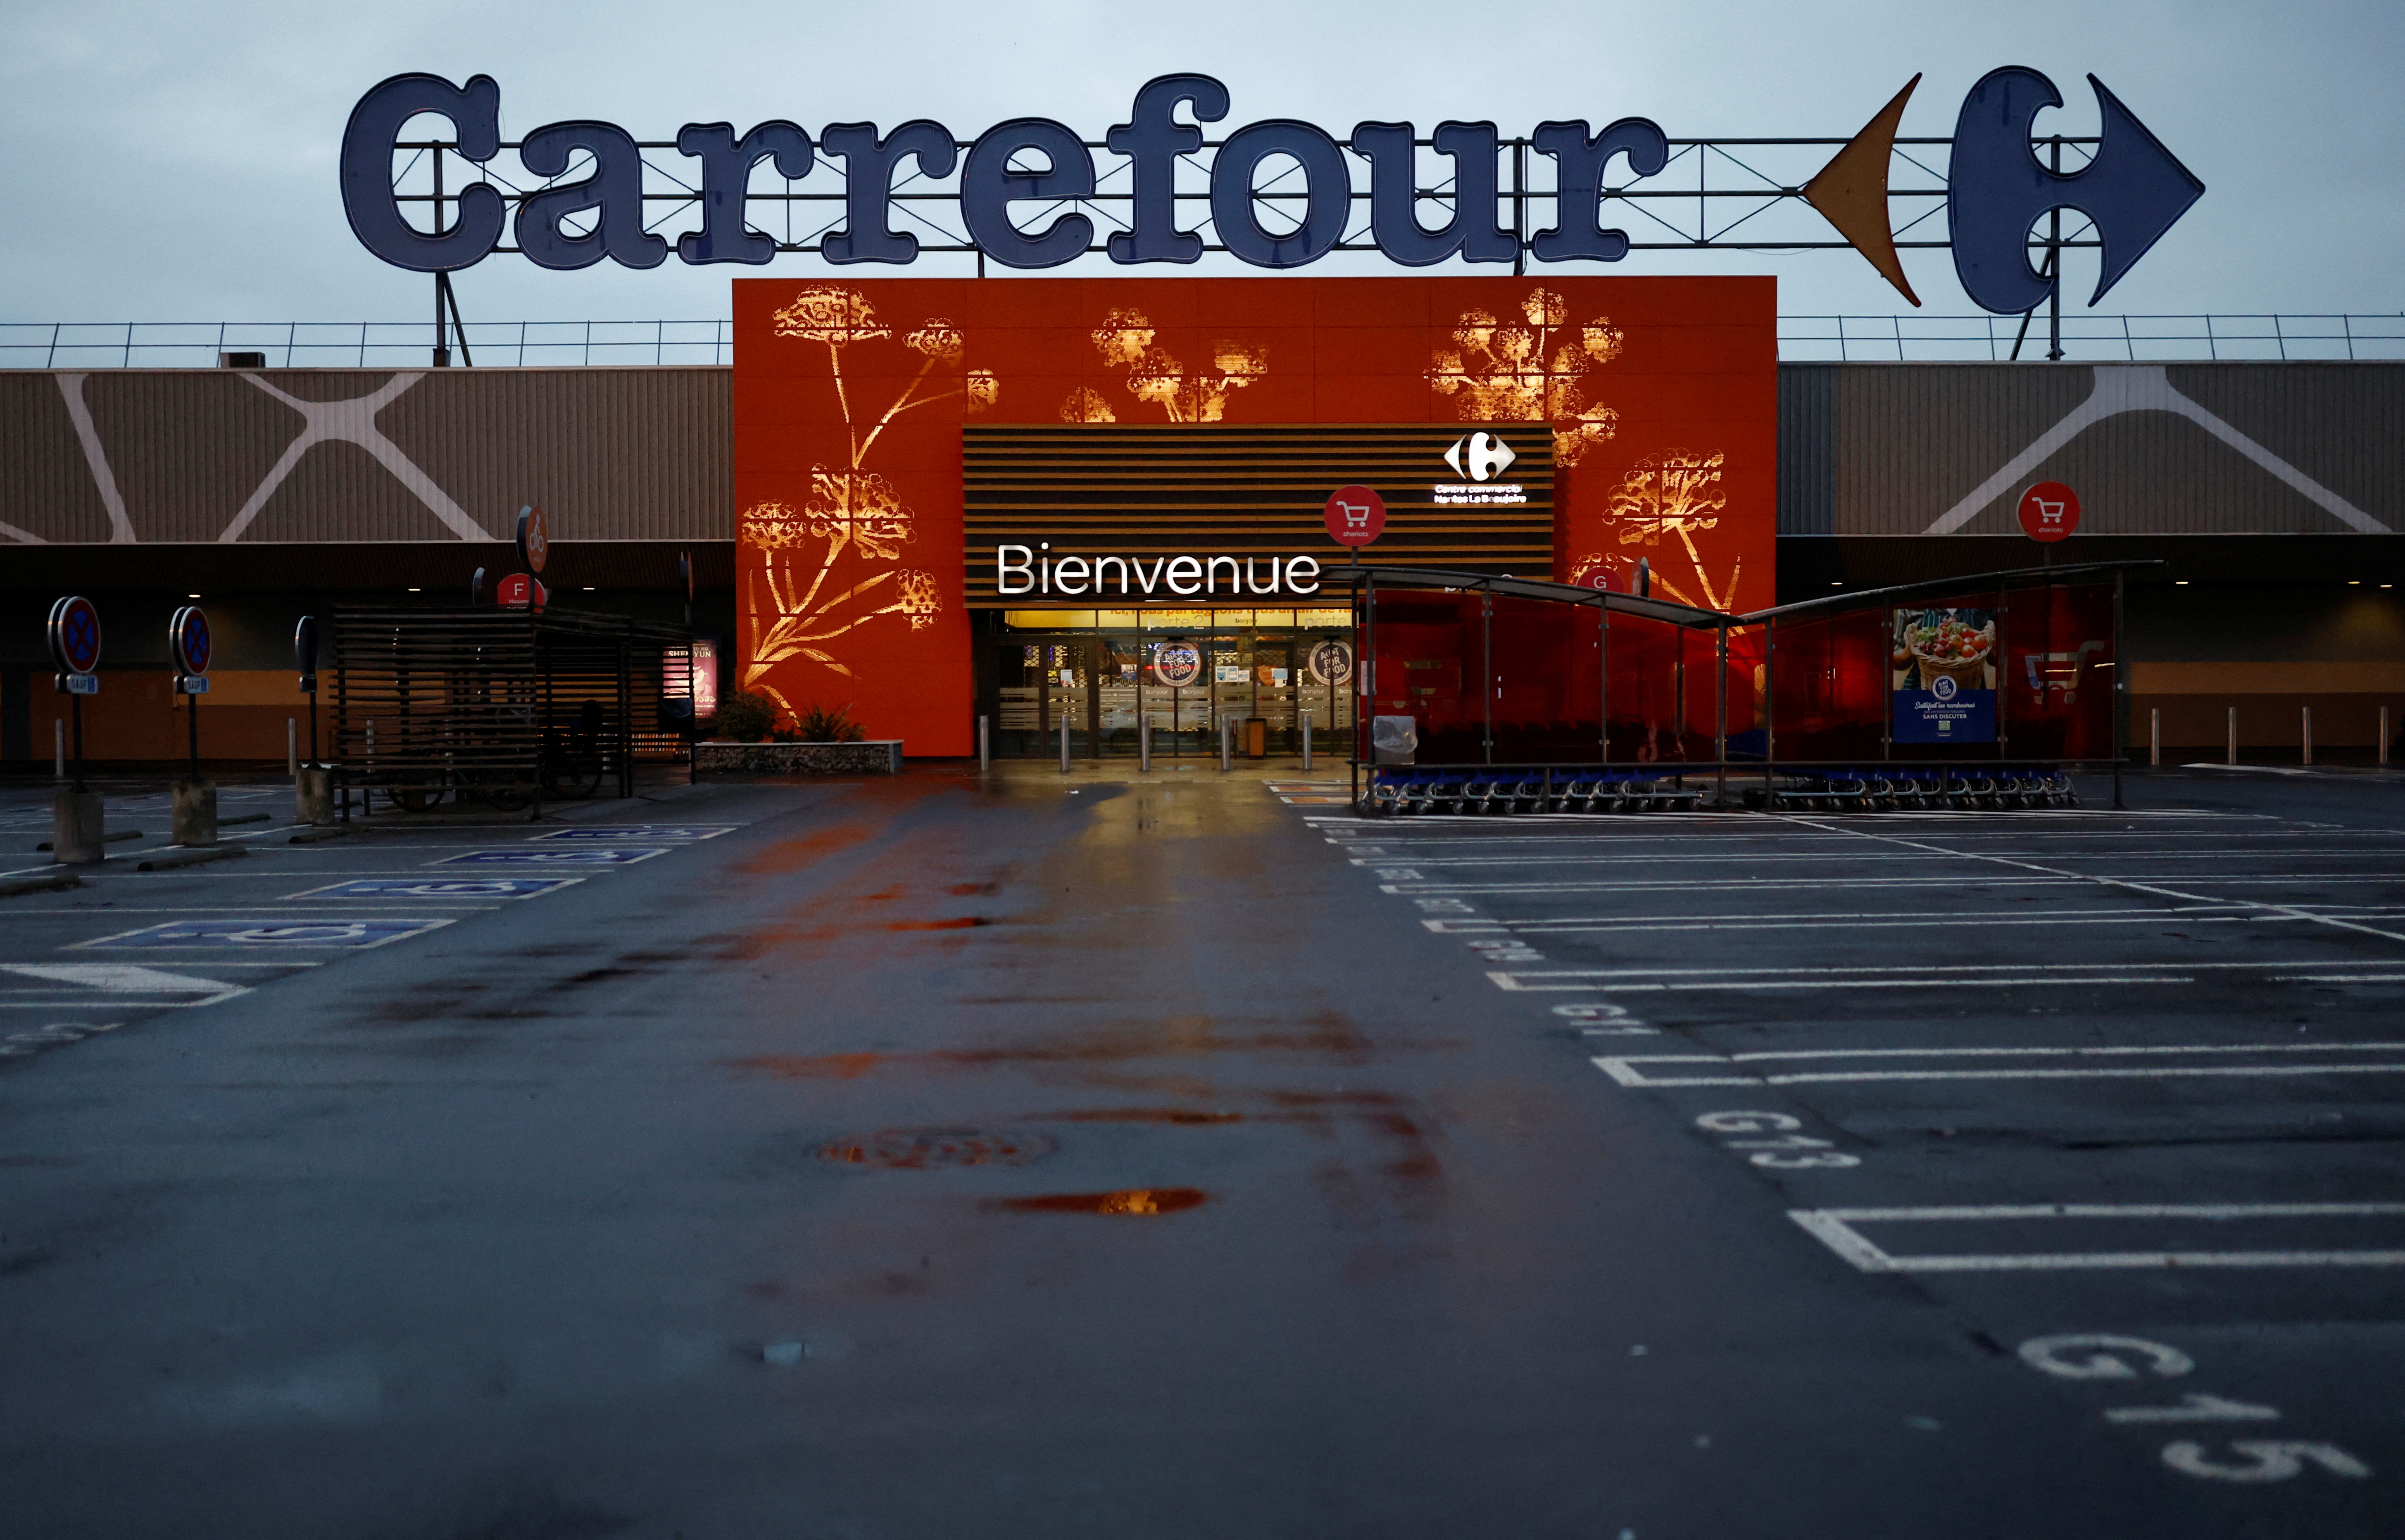 A Carrefour Hypermarket store in Nantes